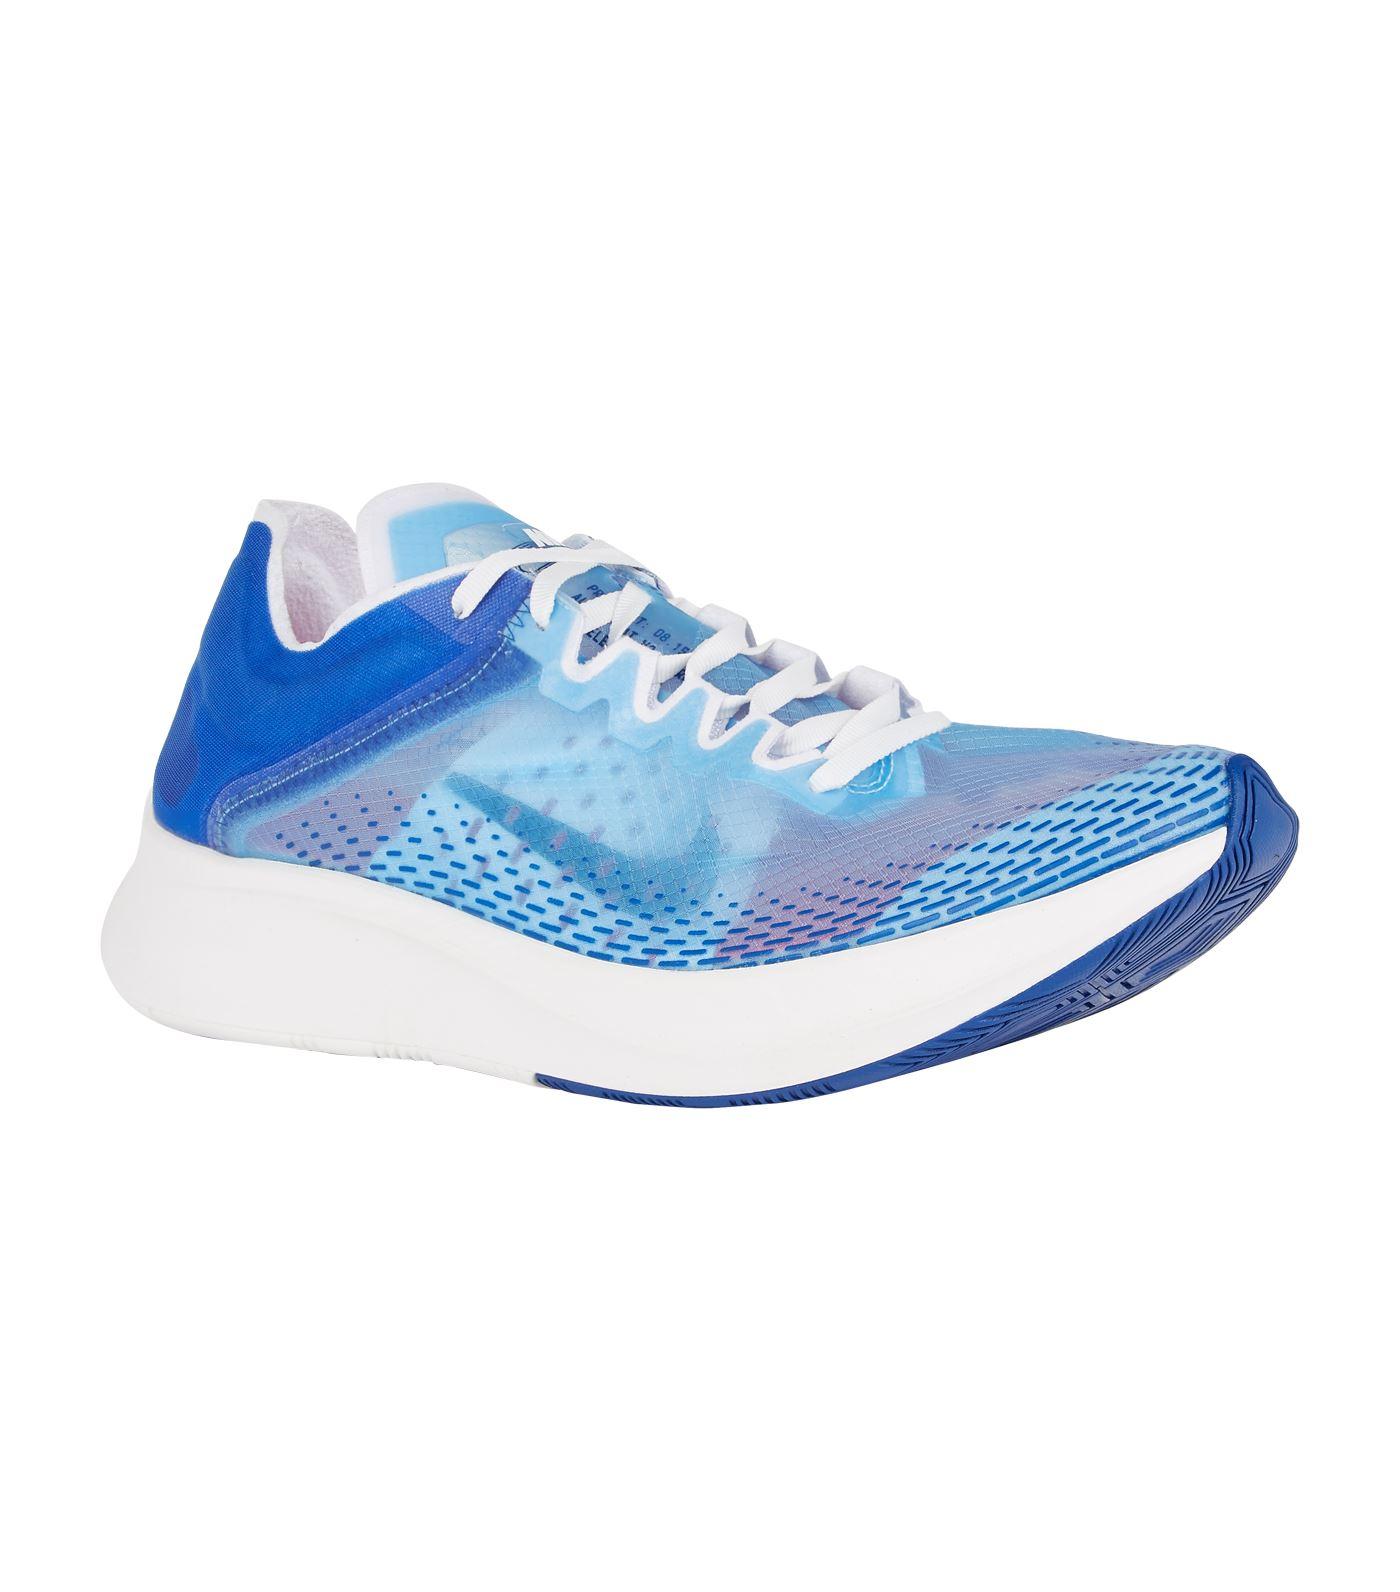 Nike Zoom Fly Sp Fast Trainers in Blue for Men - Lyst